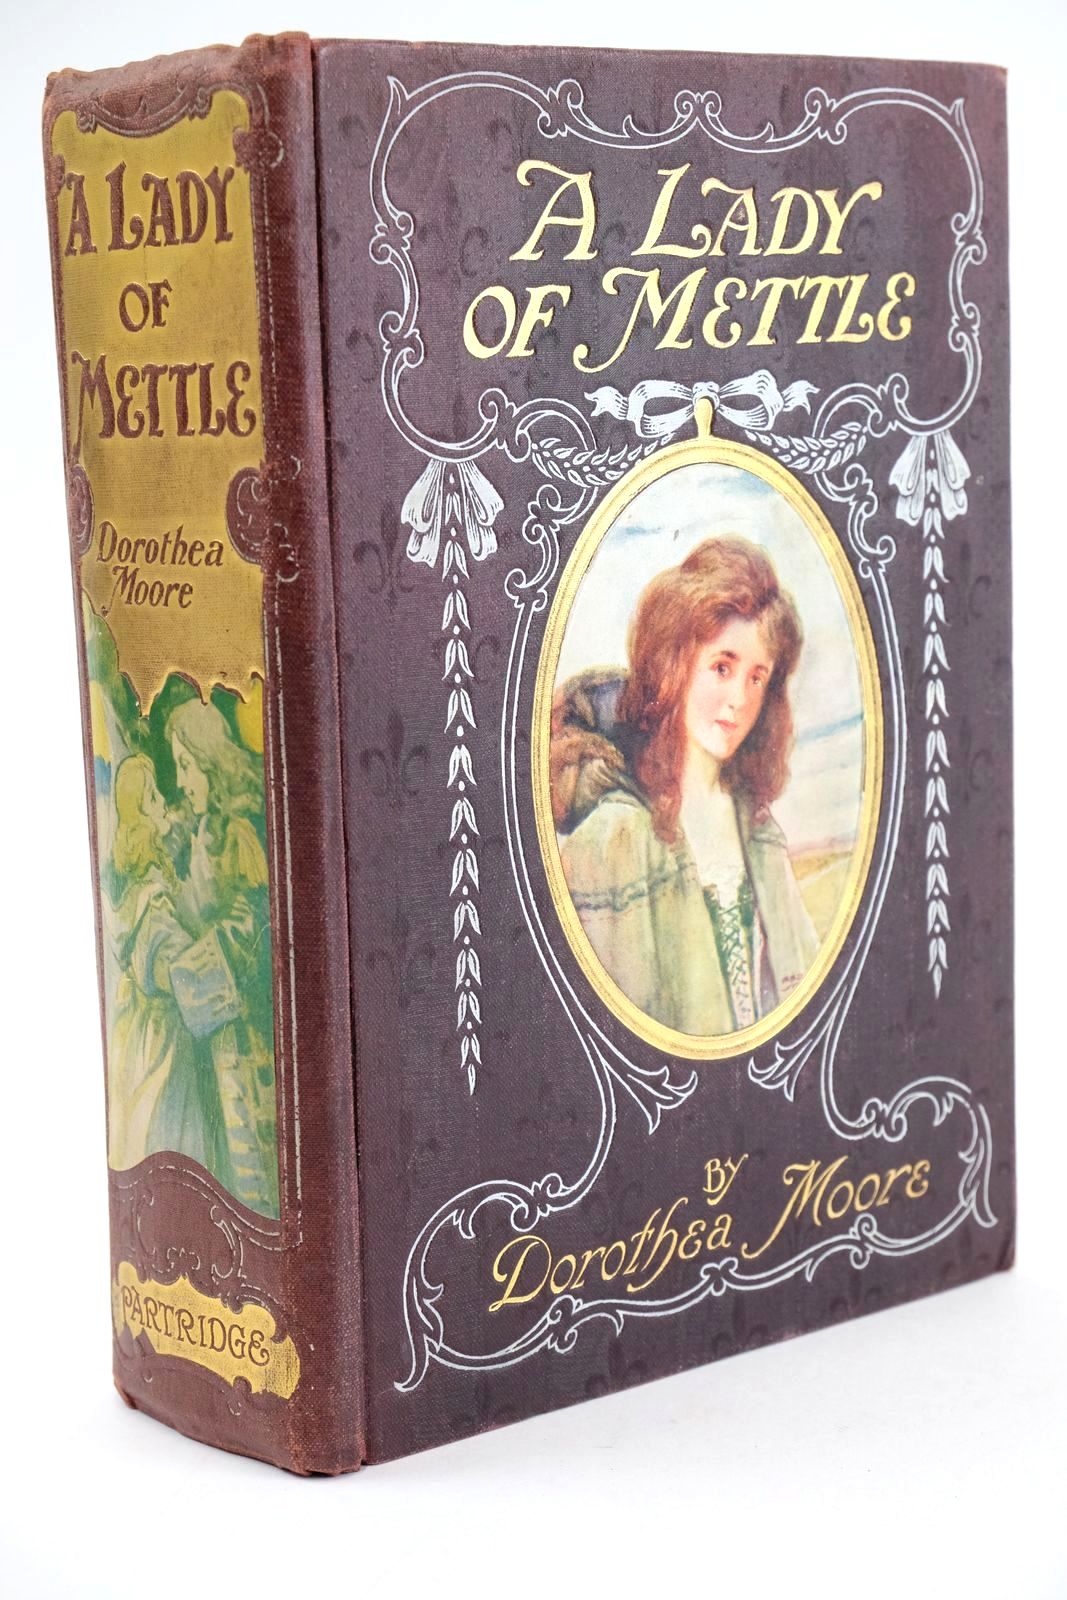 Photo of A LADY OF METTLE written by Moore, Dorothea published by S.W. Partridge & Co. Ltd. (STOCK CODE: 1324451)  for sale by Stella & Rose's Books